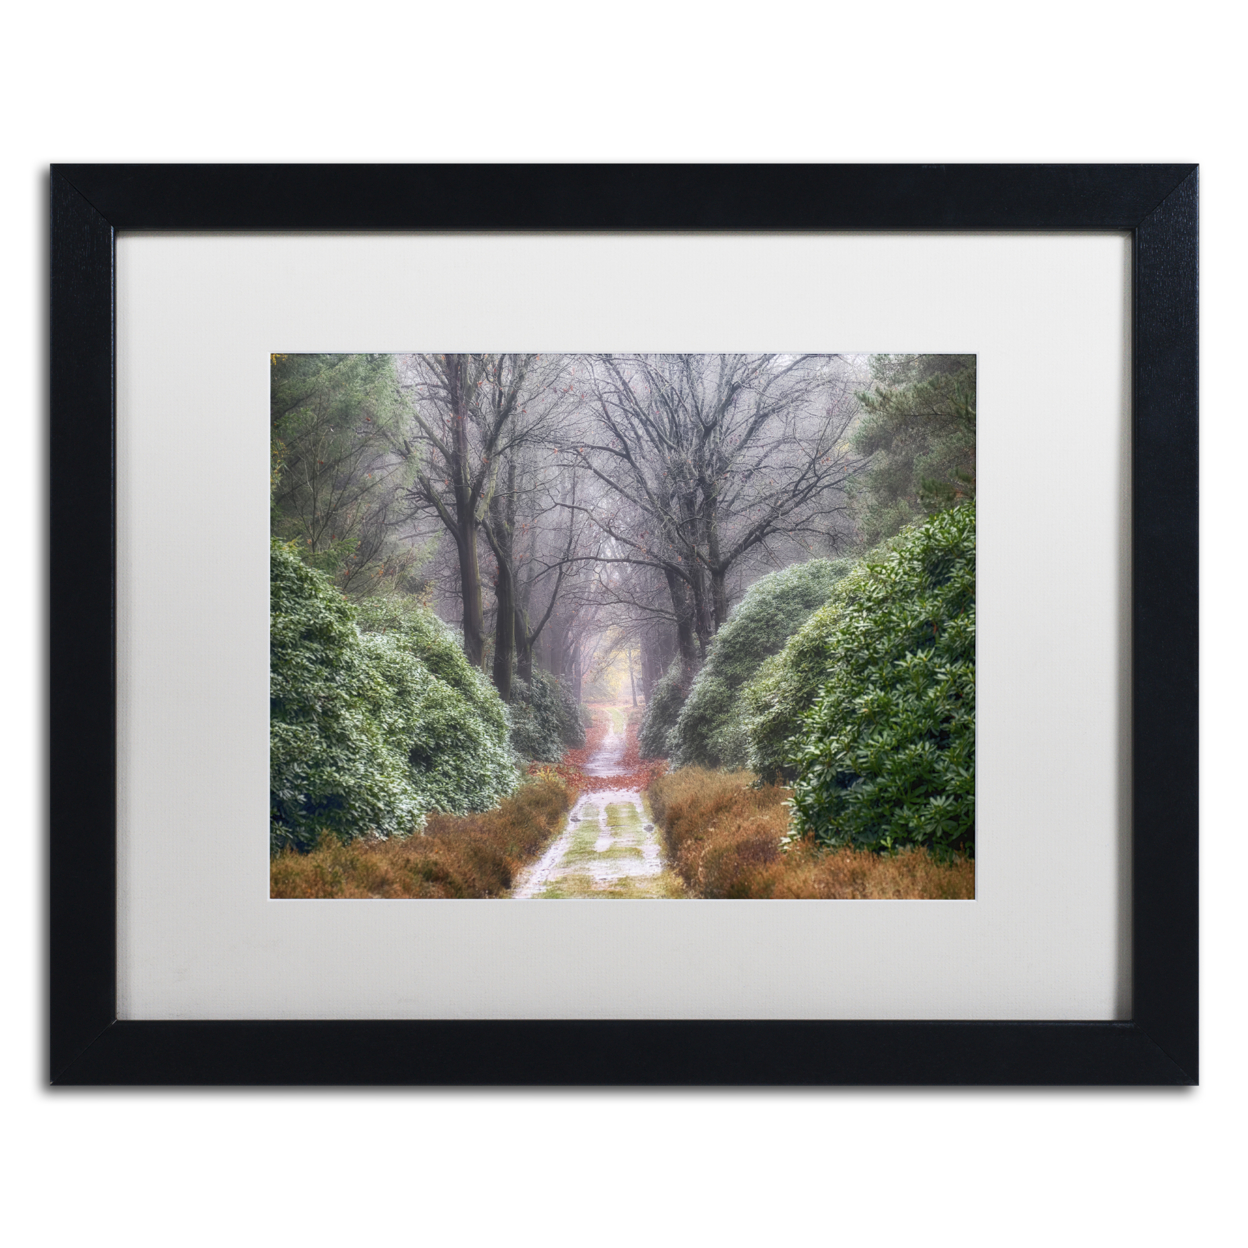 Cora Niele 'Rhododendron Lane' Black Wooden Framed Art 18 X 22 Inches